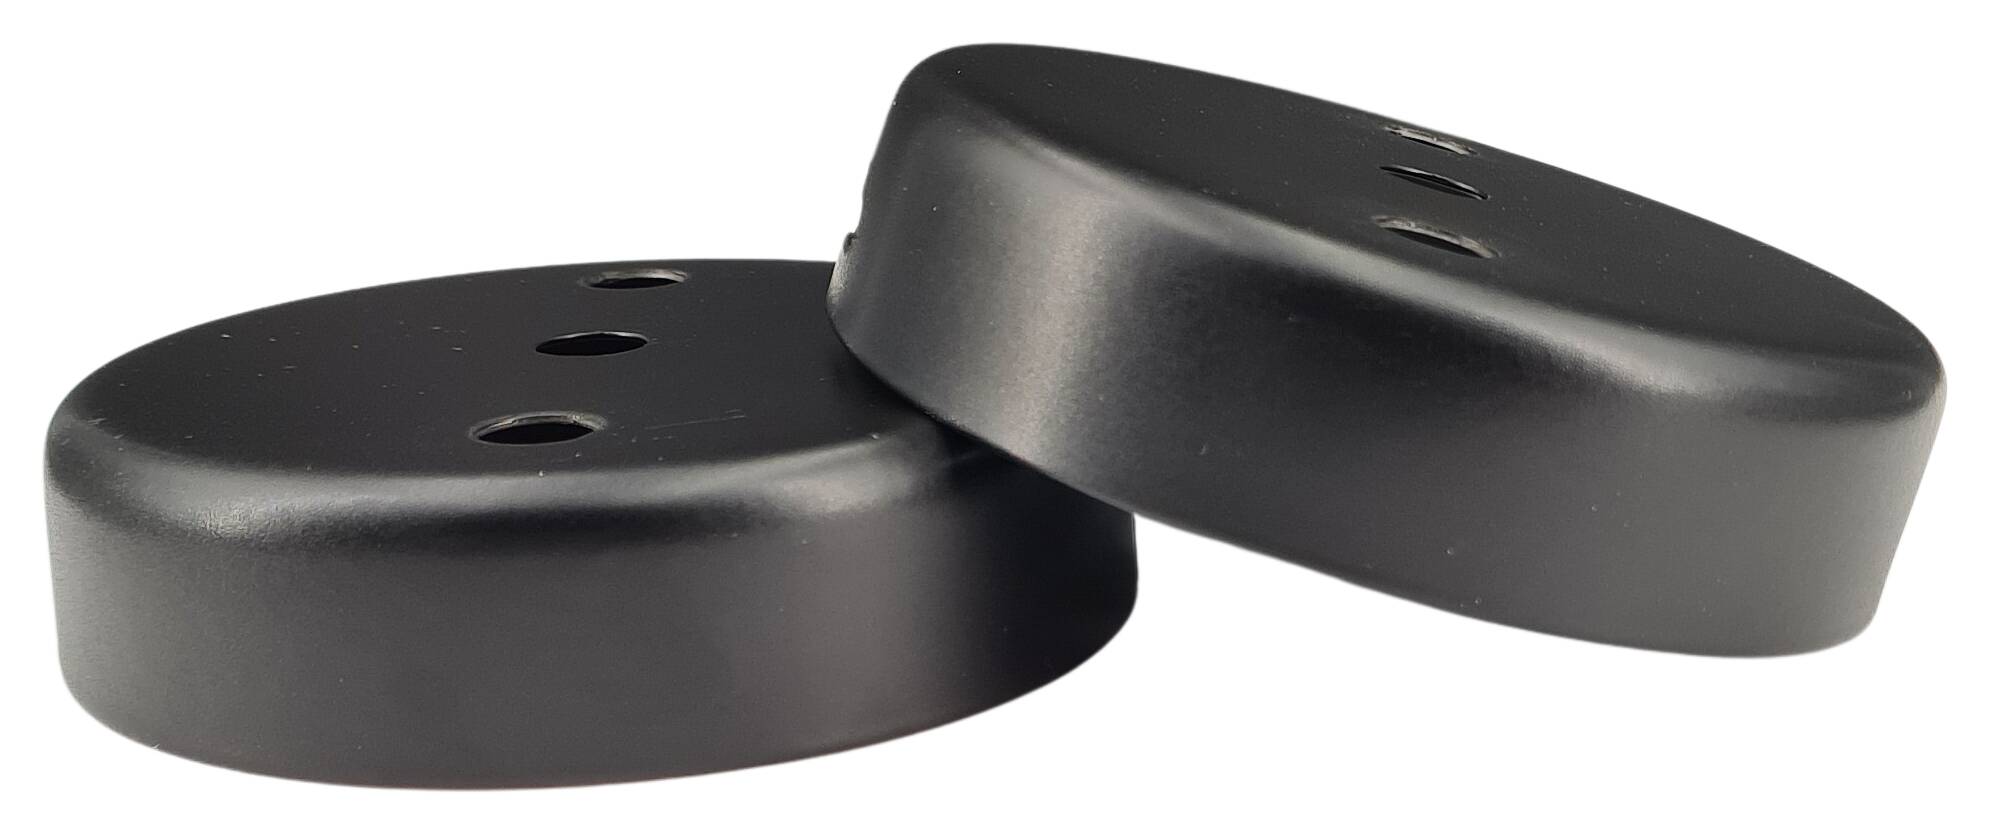 iron ceiling cap 100x25 1x MH 10,0 and 2x add. hole 10,0 with 2x bayonet black